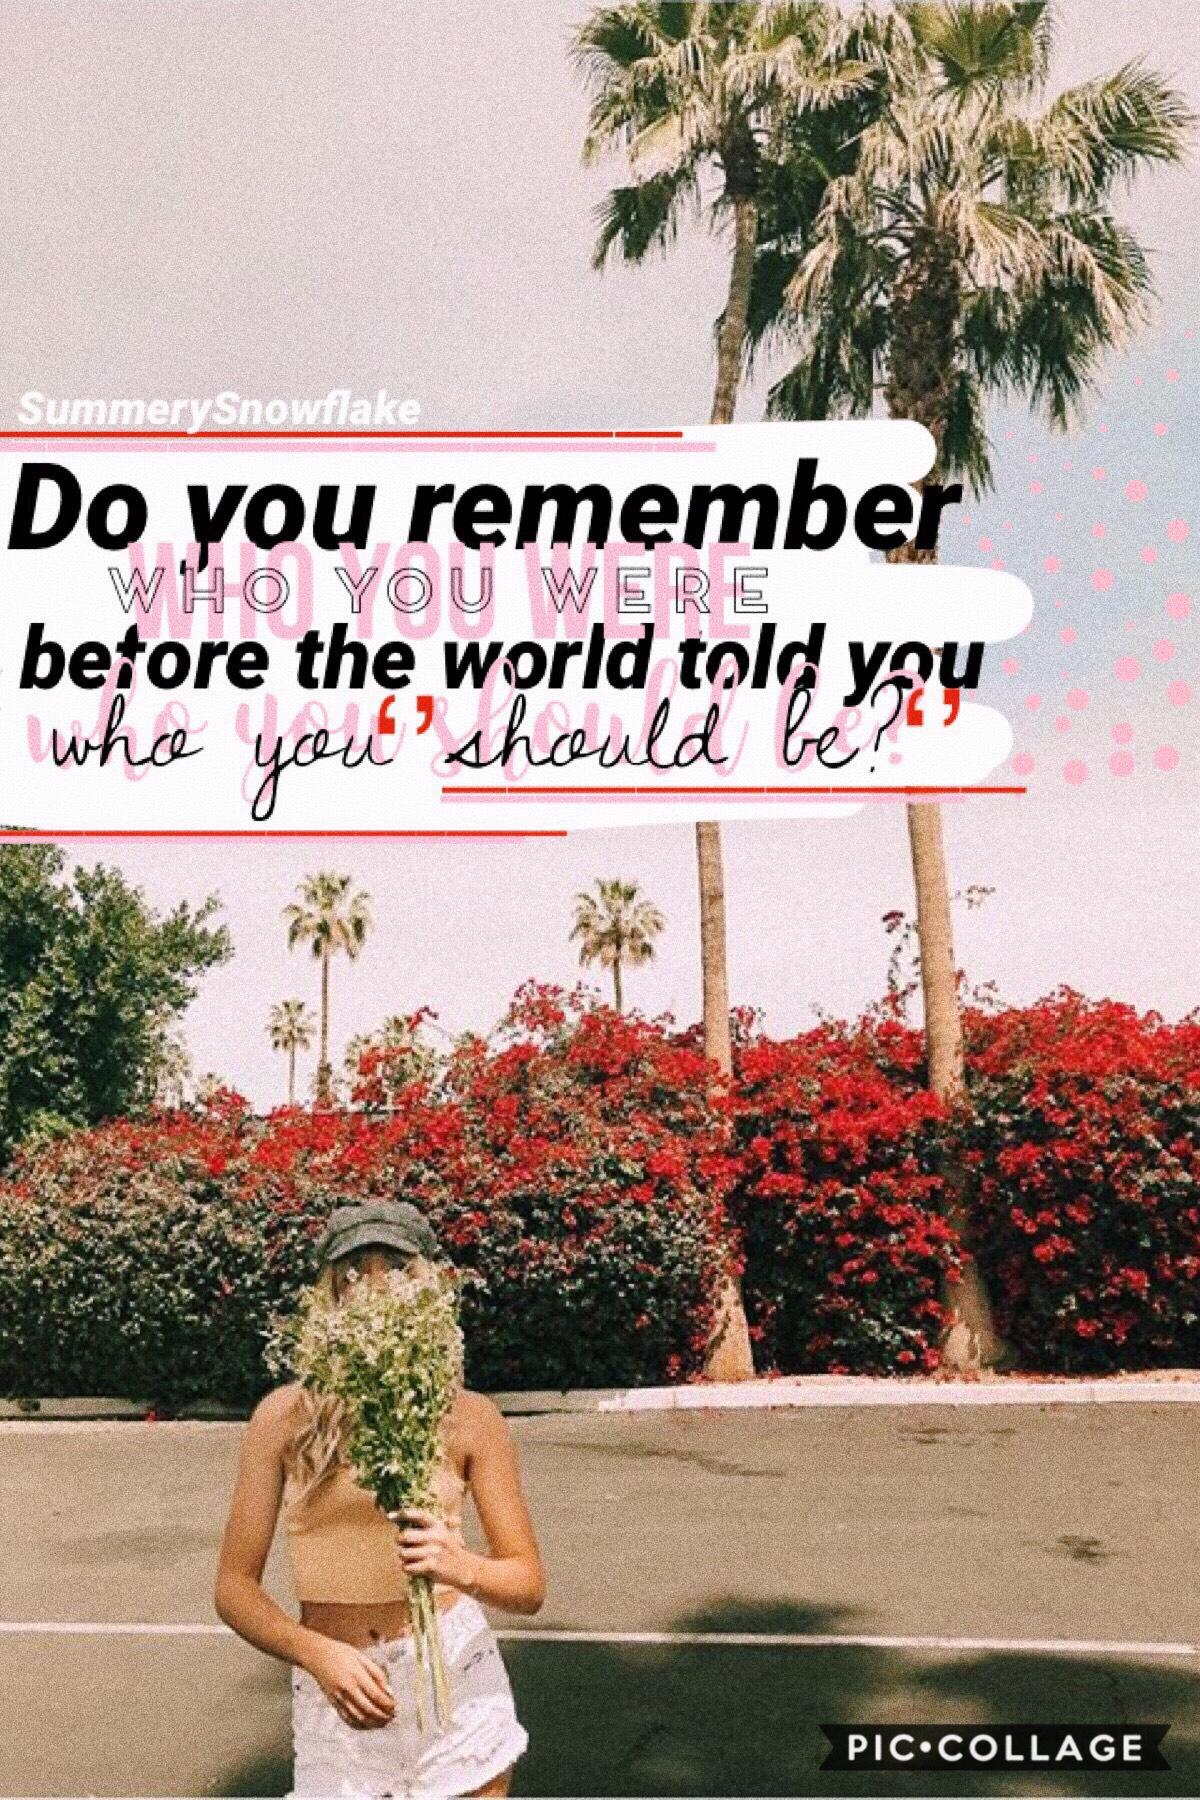 Do you remember who you were before the world told you who you « should be » ? 🌹💗
Photo : Avrey Ovard